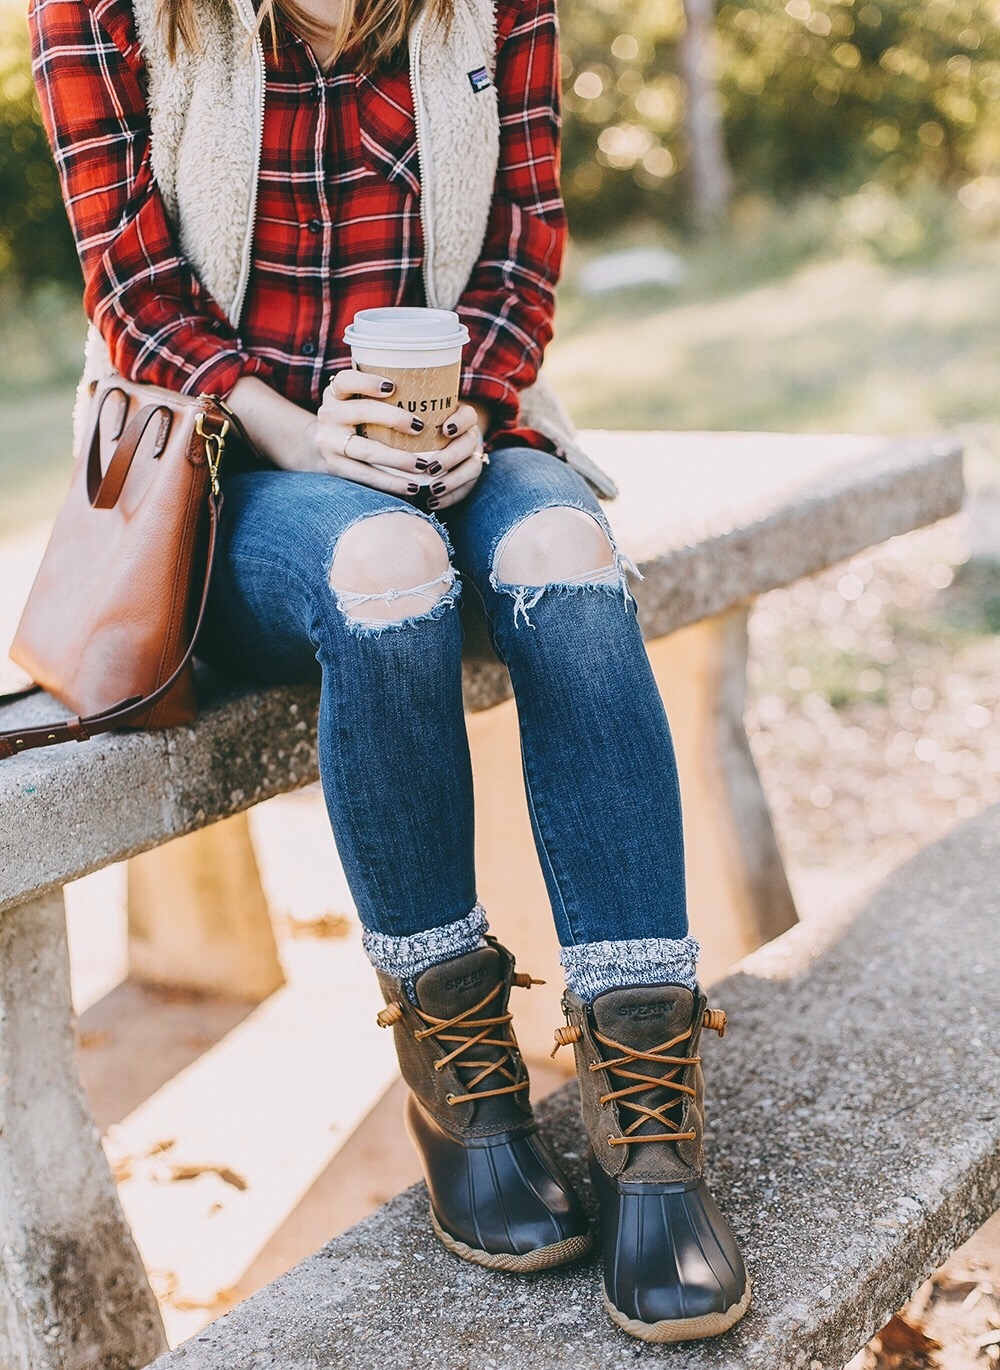 sperry duck boots outfit